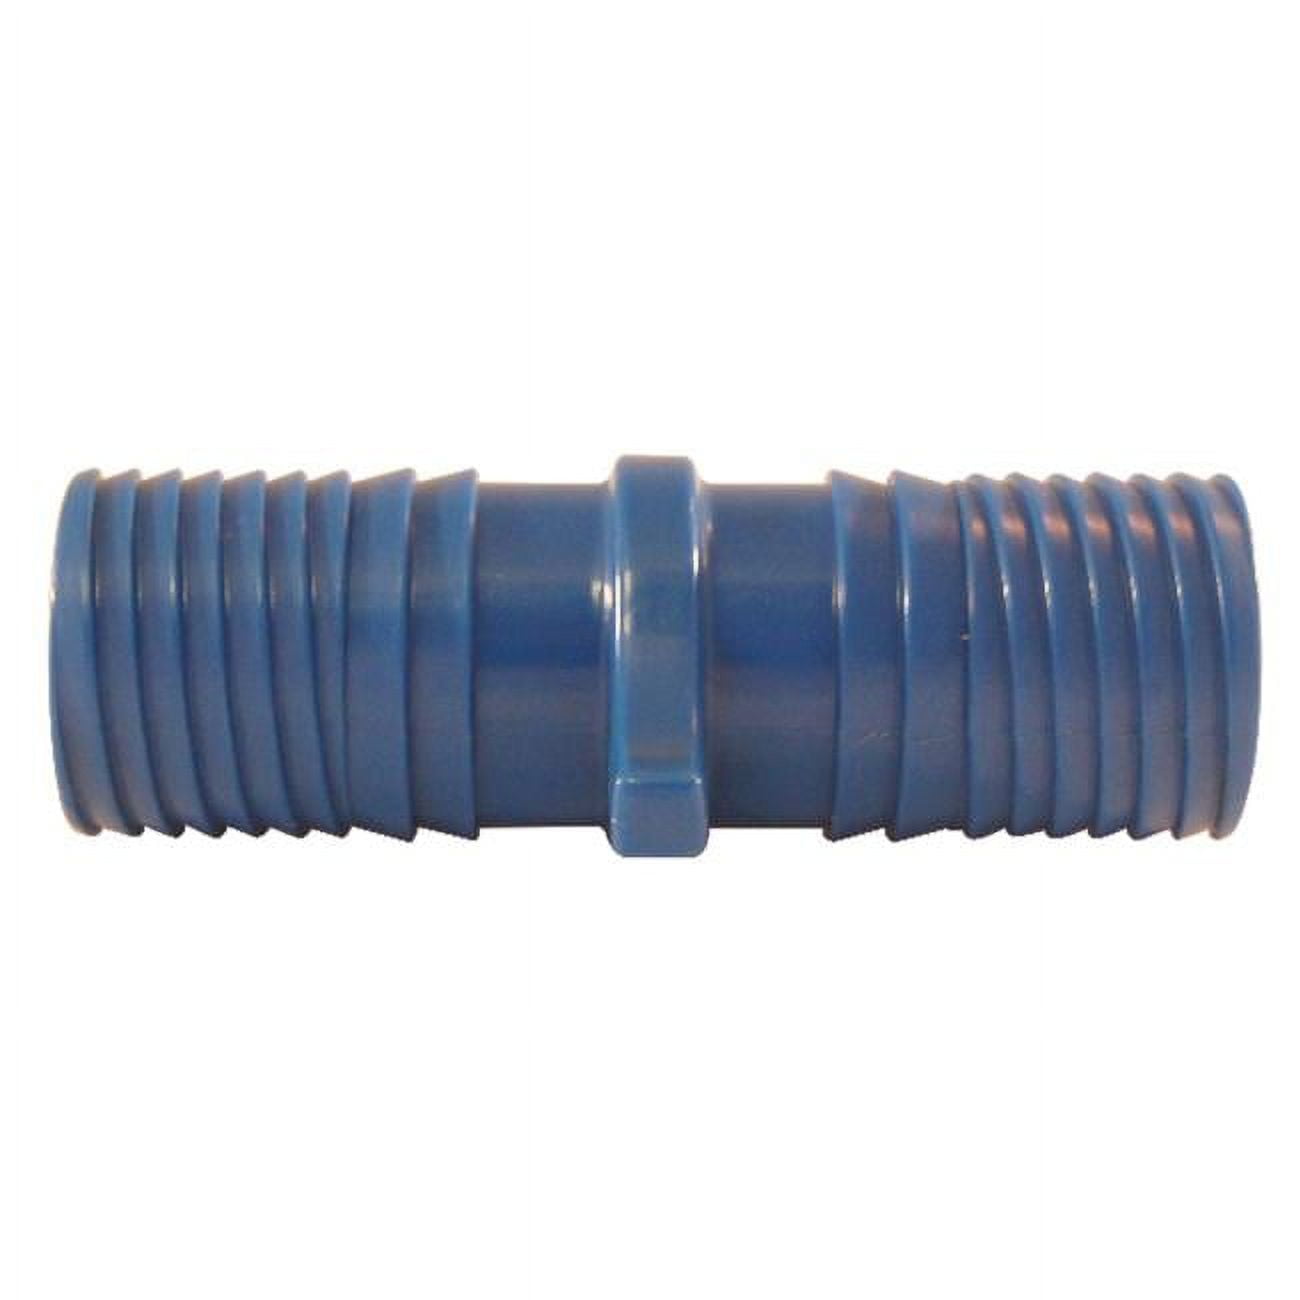 4814349 1 In. Insert X 1 In. Dia. Insert Polypropylene Coupling, Blue - Pack Of 5